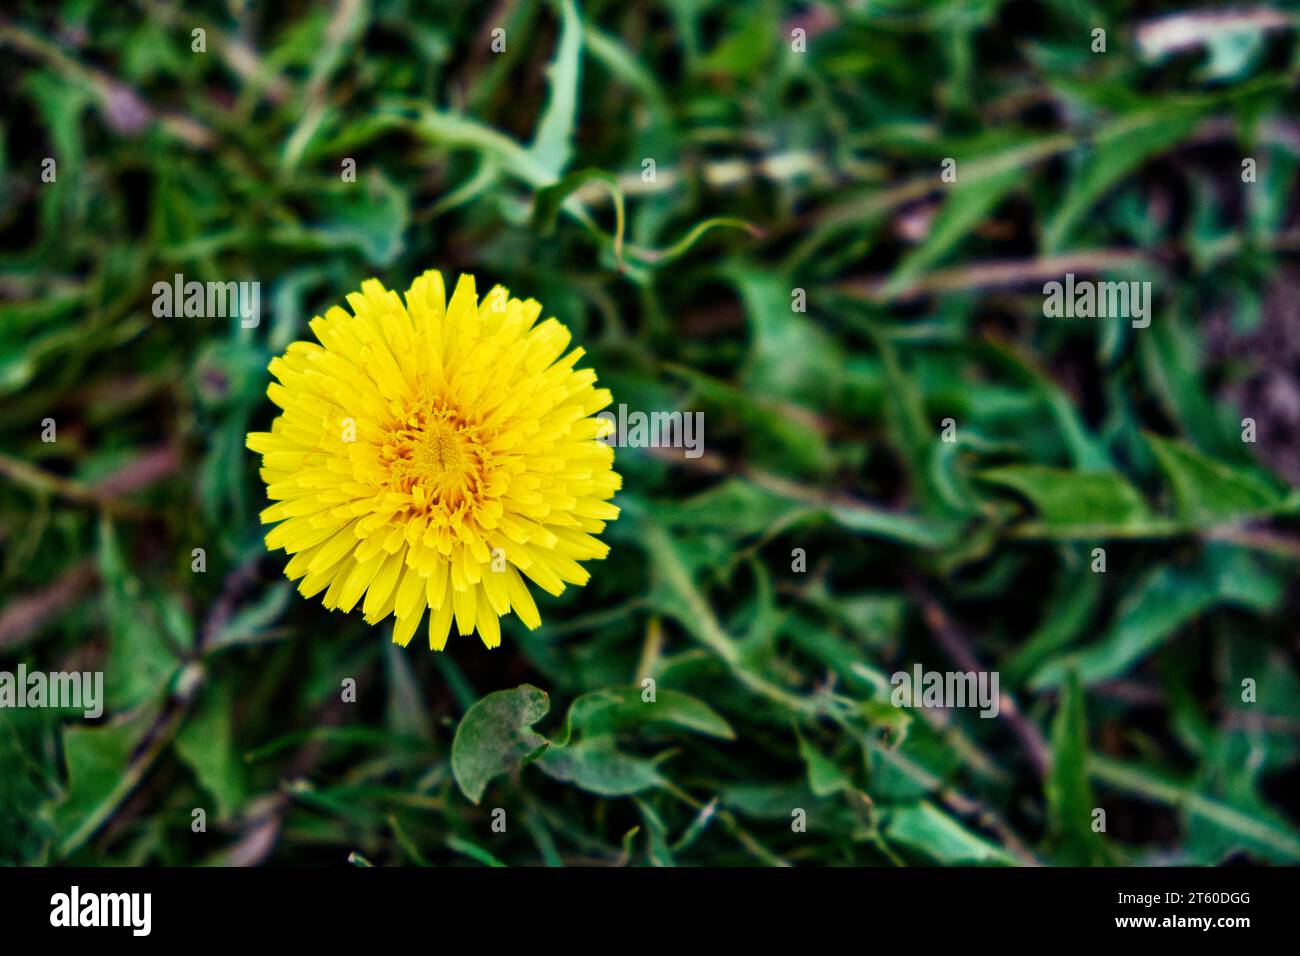 In a radiant display of nature's beauty, a vibrant yellow dandelion flower is in full bloom, creating a striking contrast against the lush green grass Stock Photo